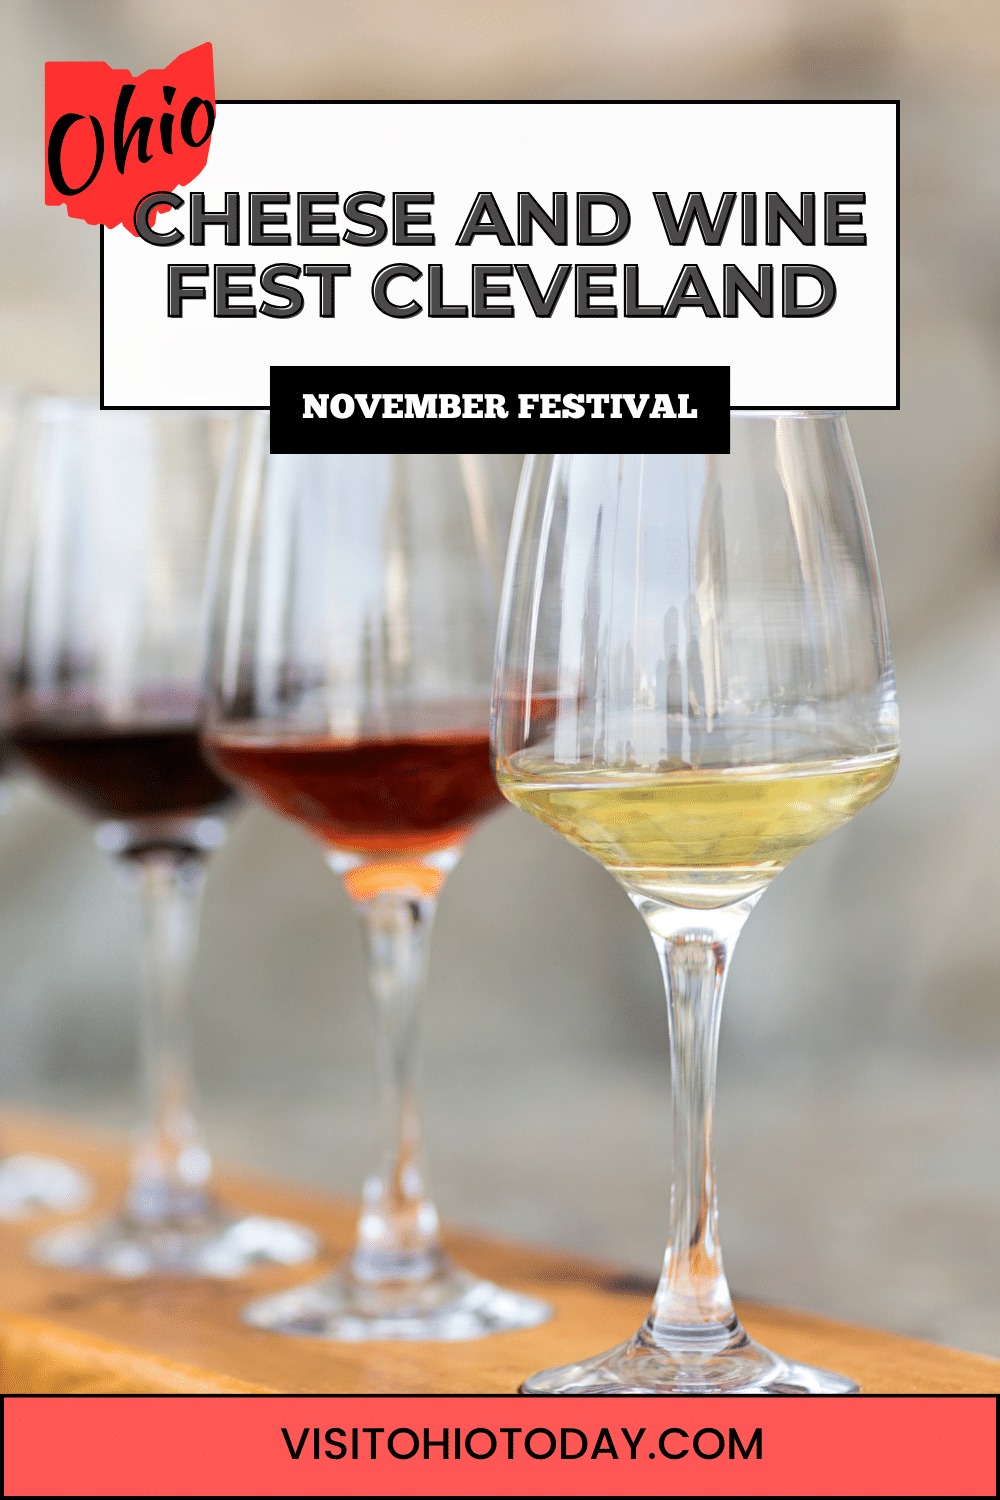 The Cheese and Wine Fest Cleveland is on November 19, 2023 at Landerhaven in Mayfield Heights.